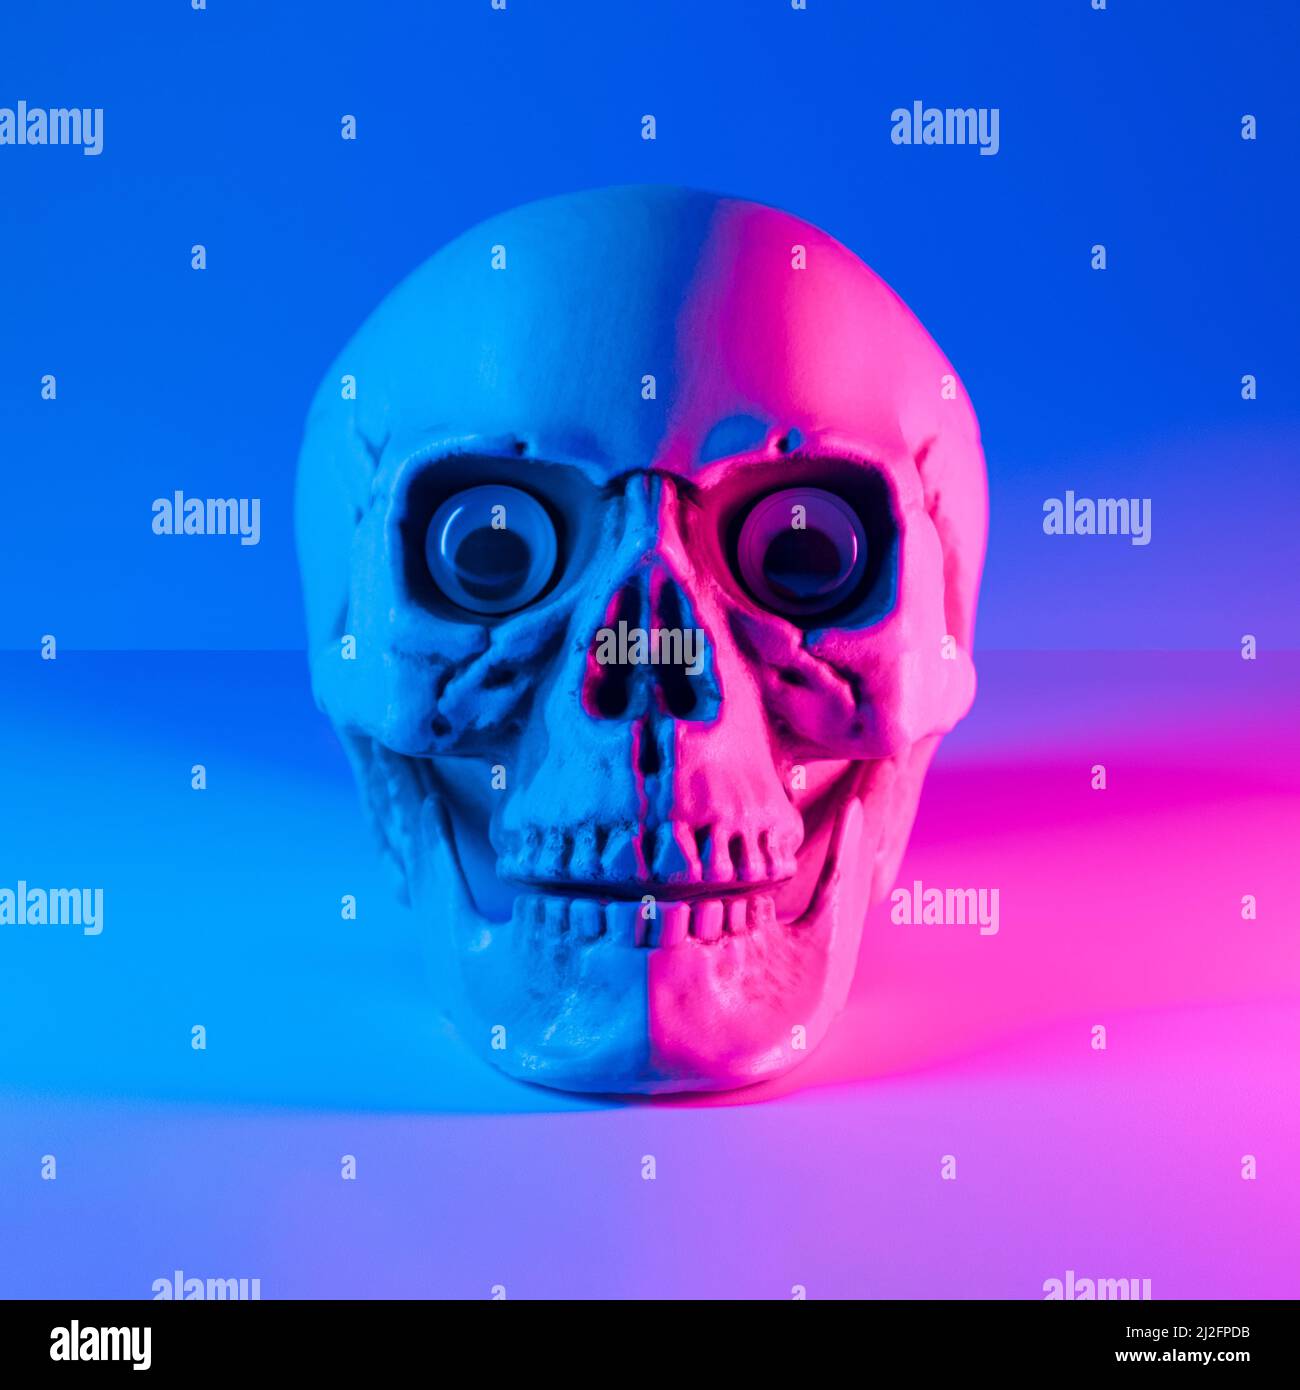 Human skull with angry expression and magenta and blue hues. NFT neon conceptual background. Stock Photo